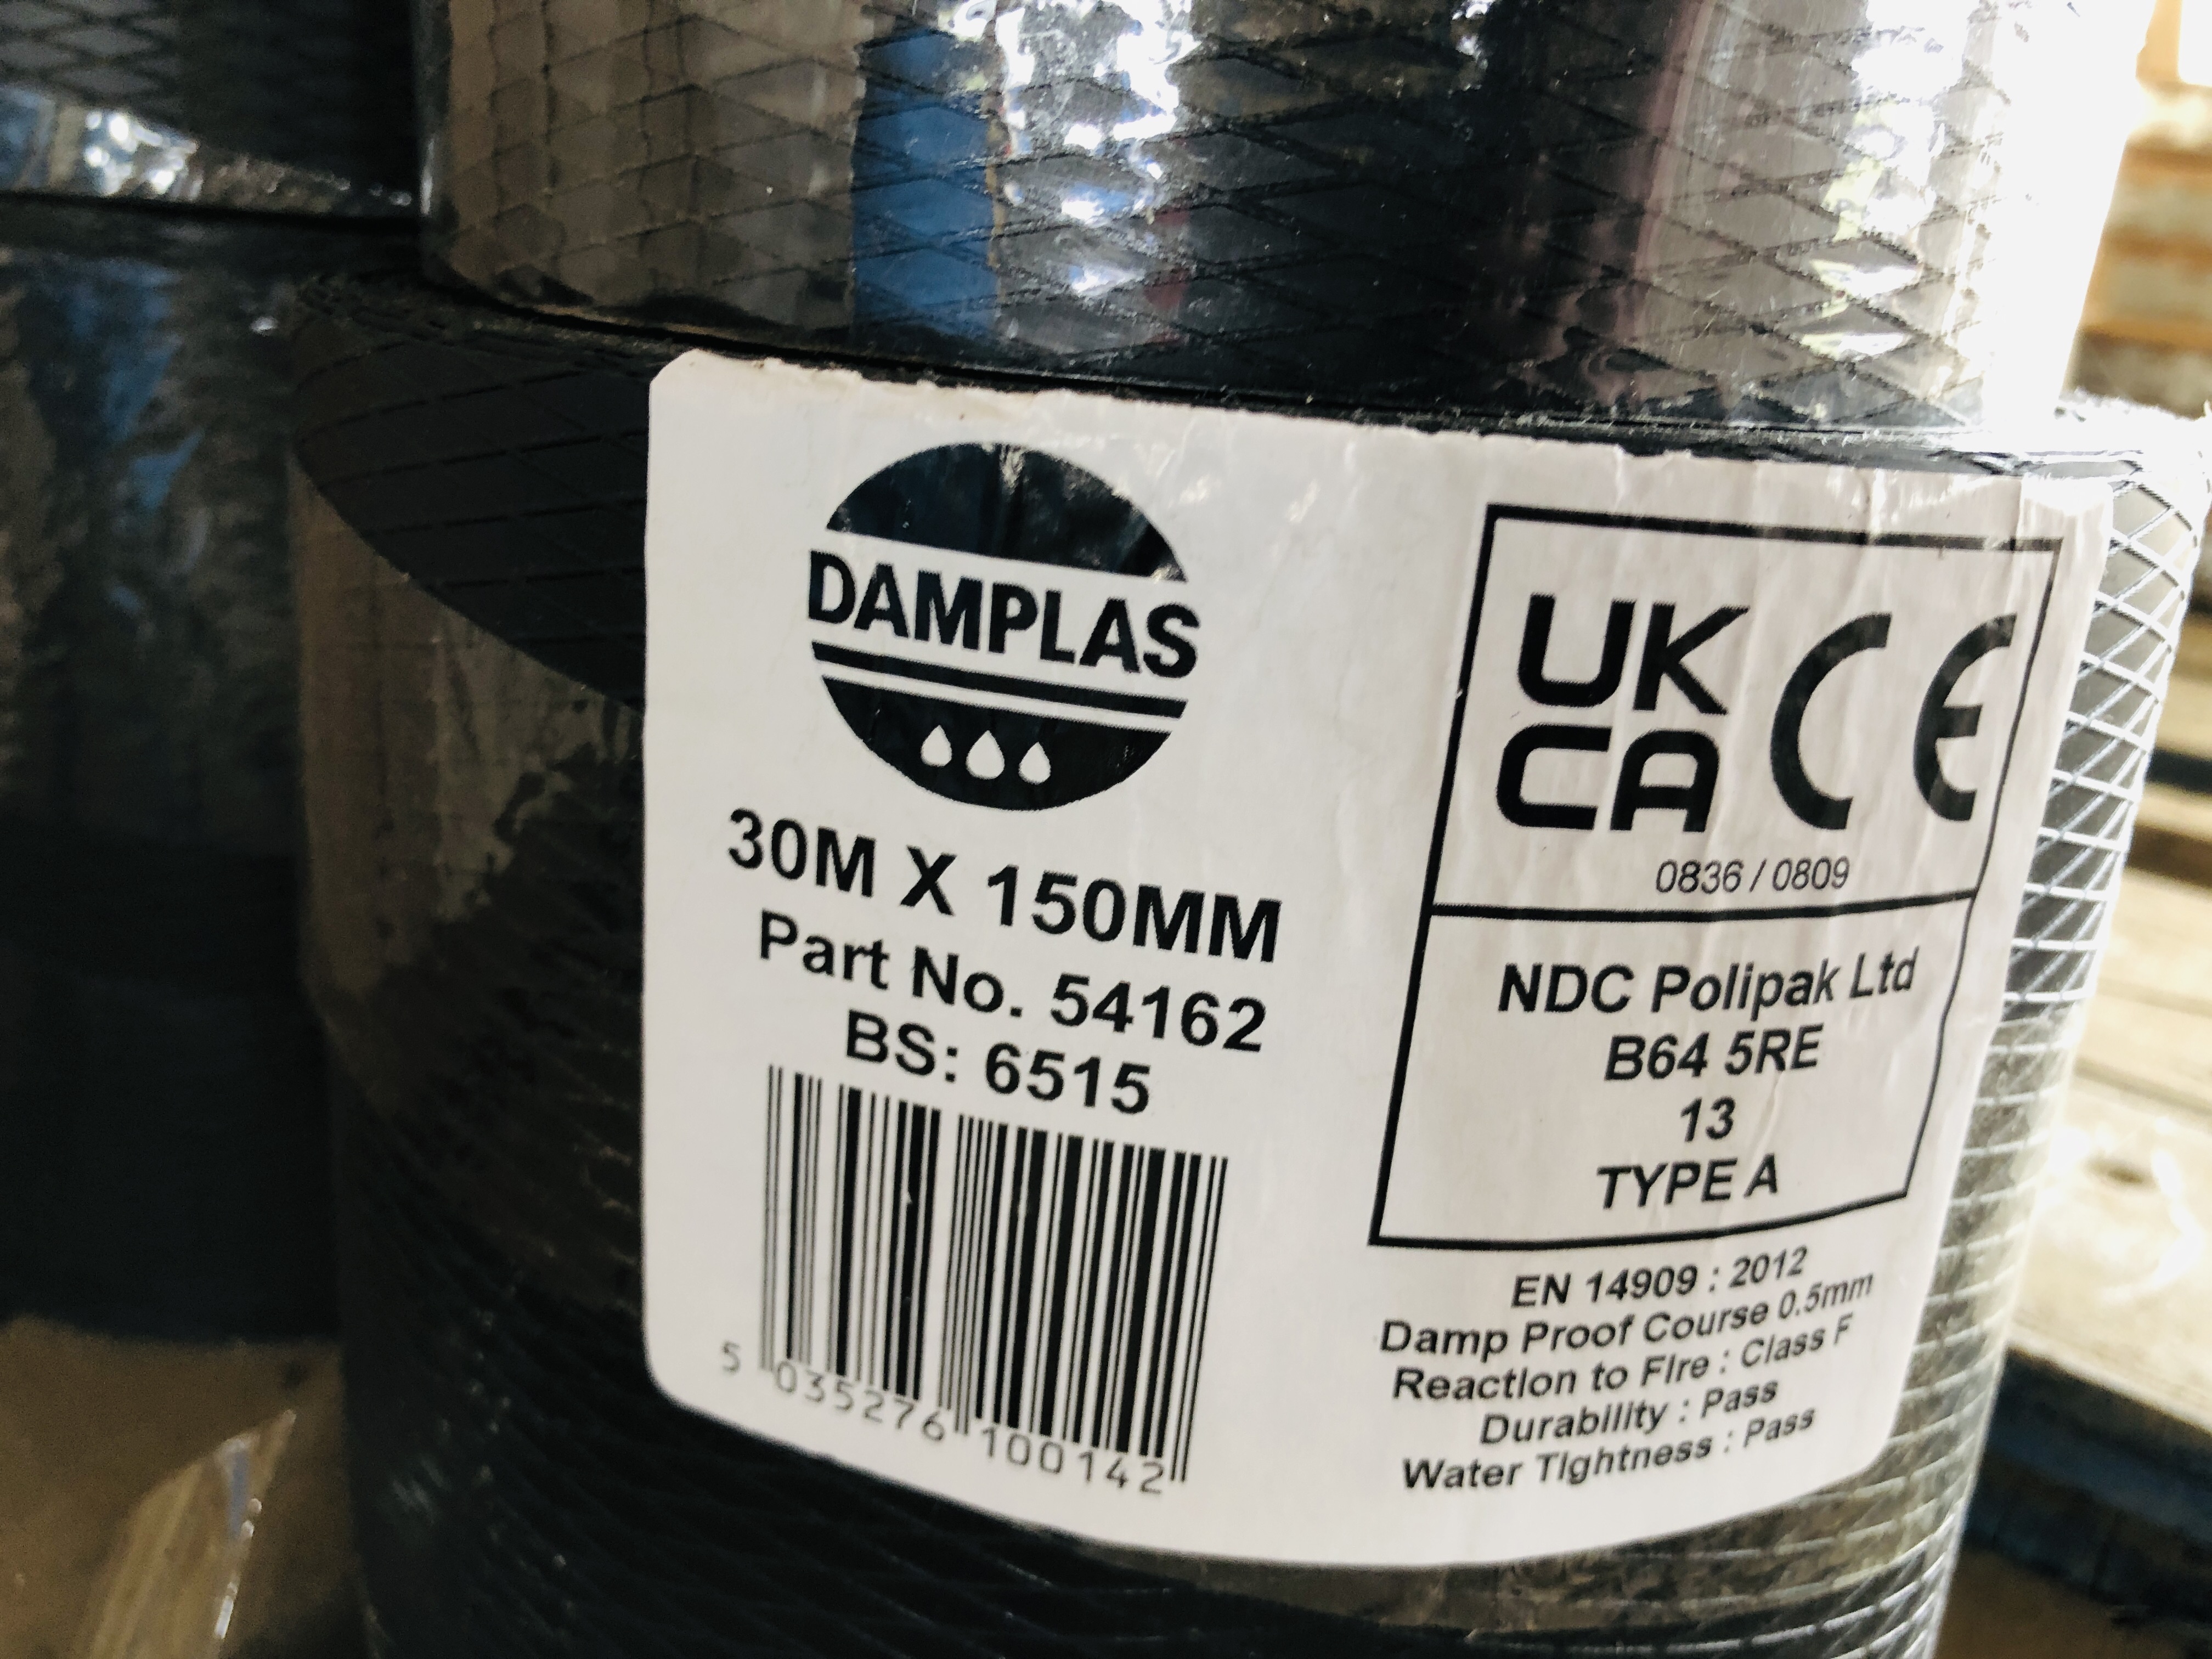 4 X COMPLETE ROLLS DAMPLAS 30M X 150MM DAMP PROOF COURSE. - Image 2 of 2